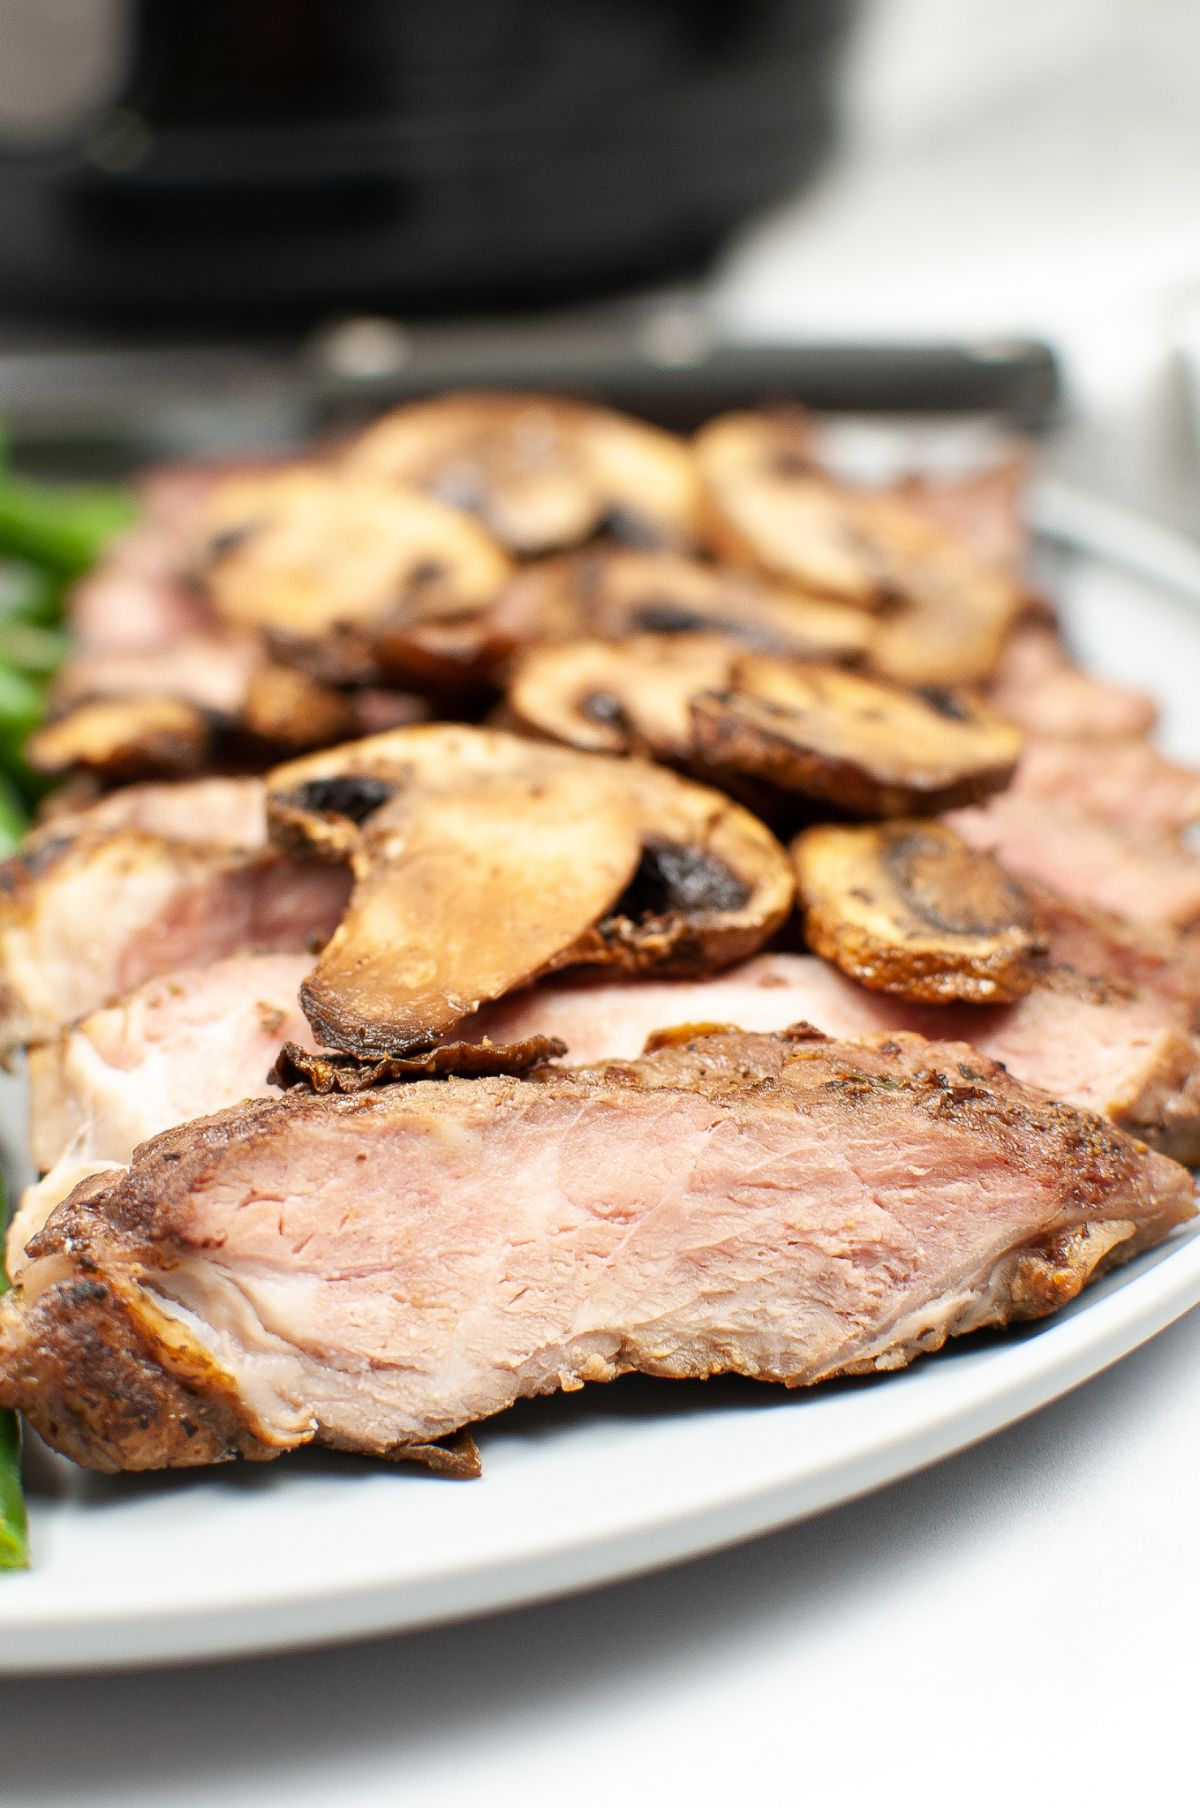 A vertical close up image of a slice of Air Fryer Steak and Mushrooms with the other slices and some mushrooms blurred in the background.